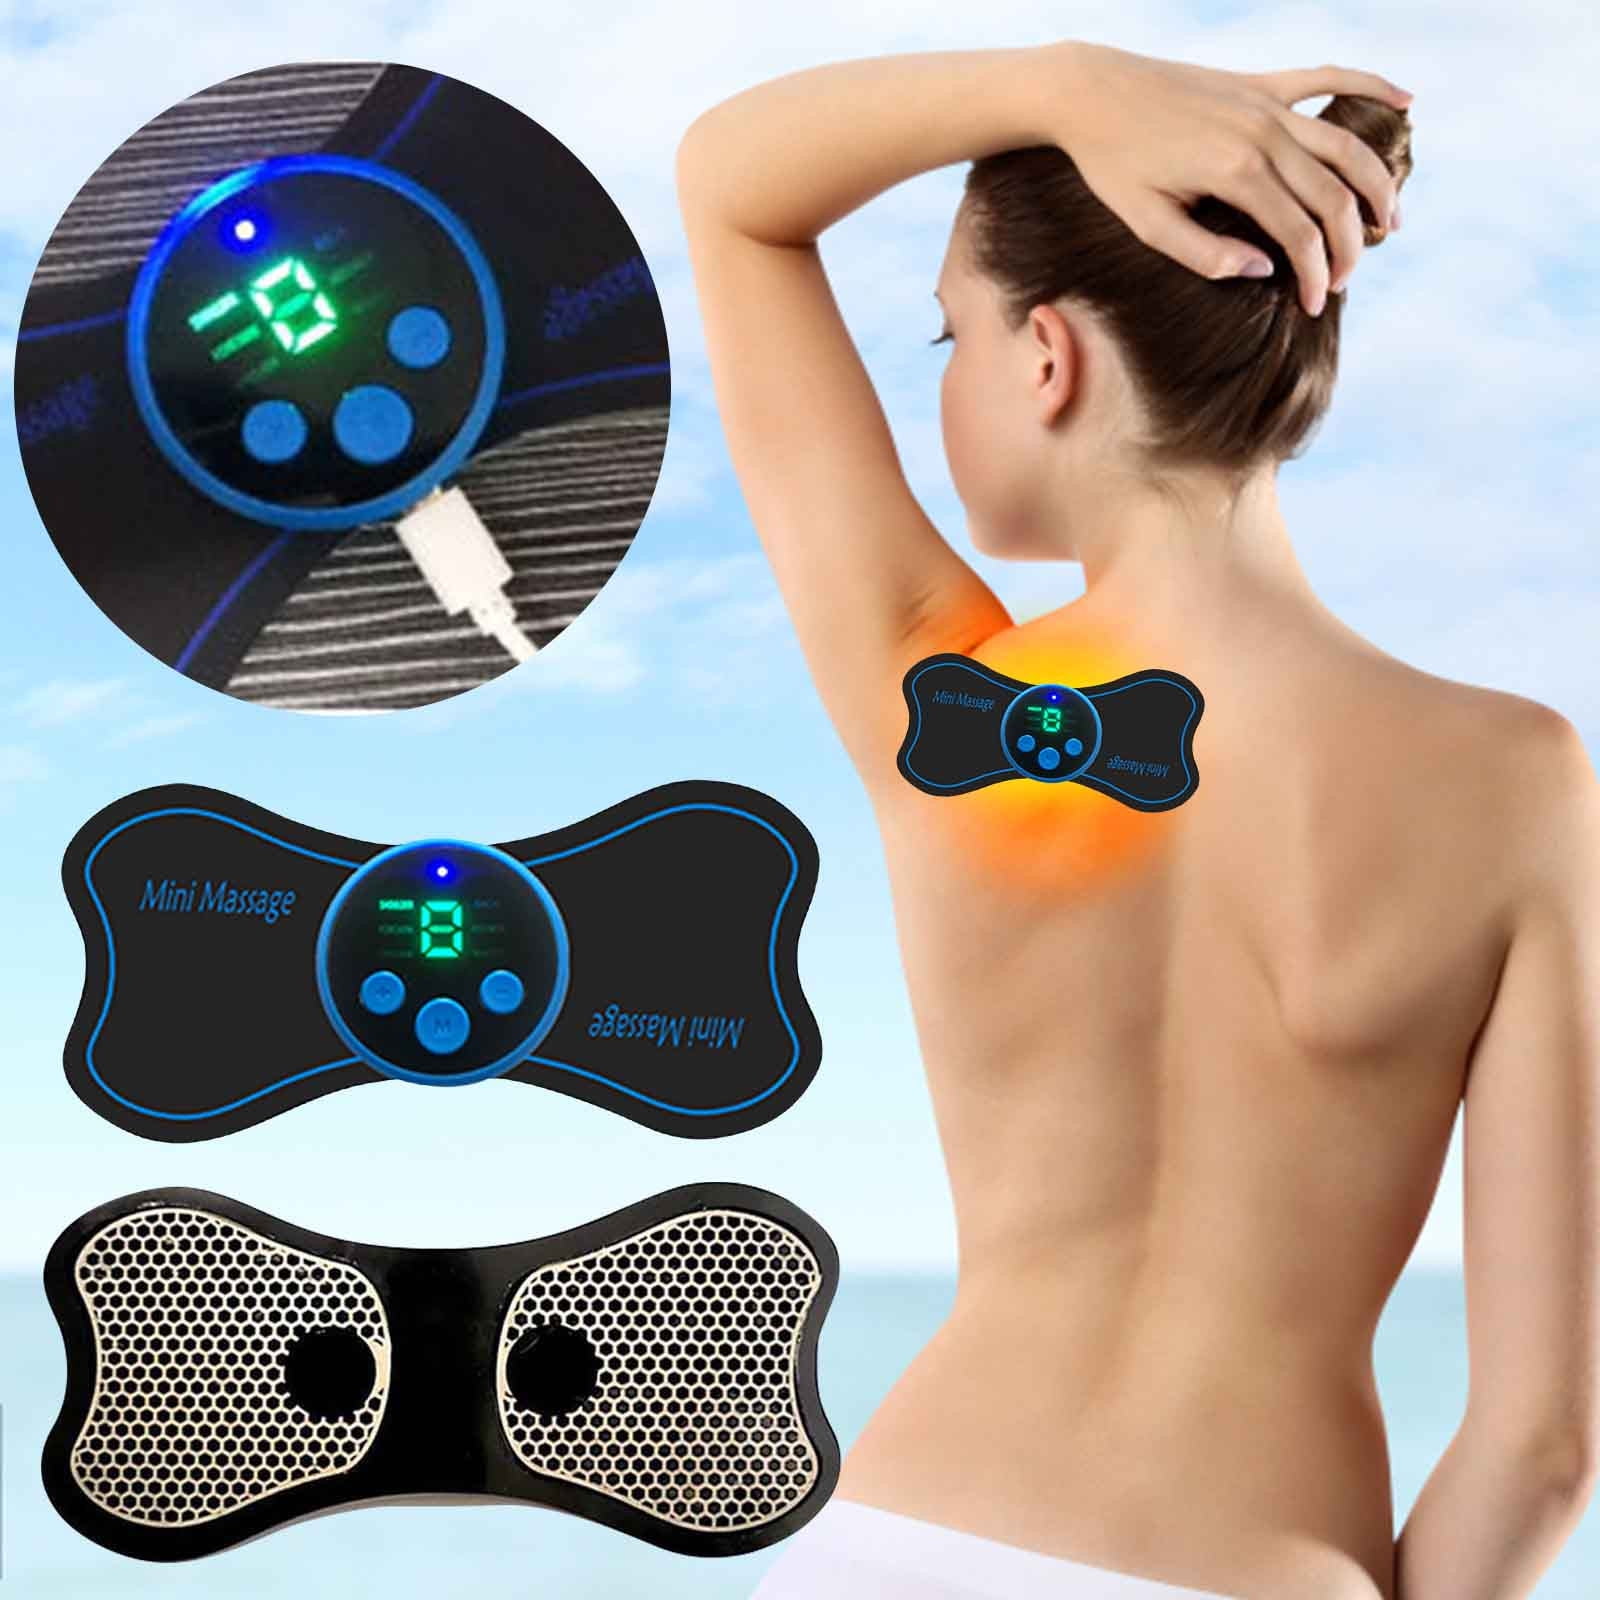 Free shipping] Cervical spine massager with multiple massage modes  throughout the voice prompt SKG-N5 Father's Day gift - Shop SKG Gadgets -  Pinkoi